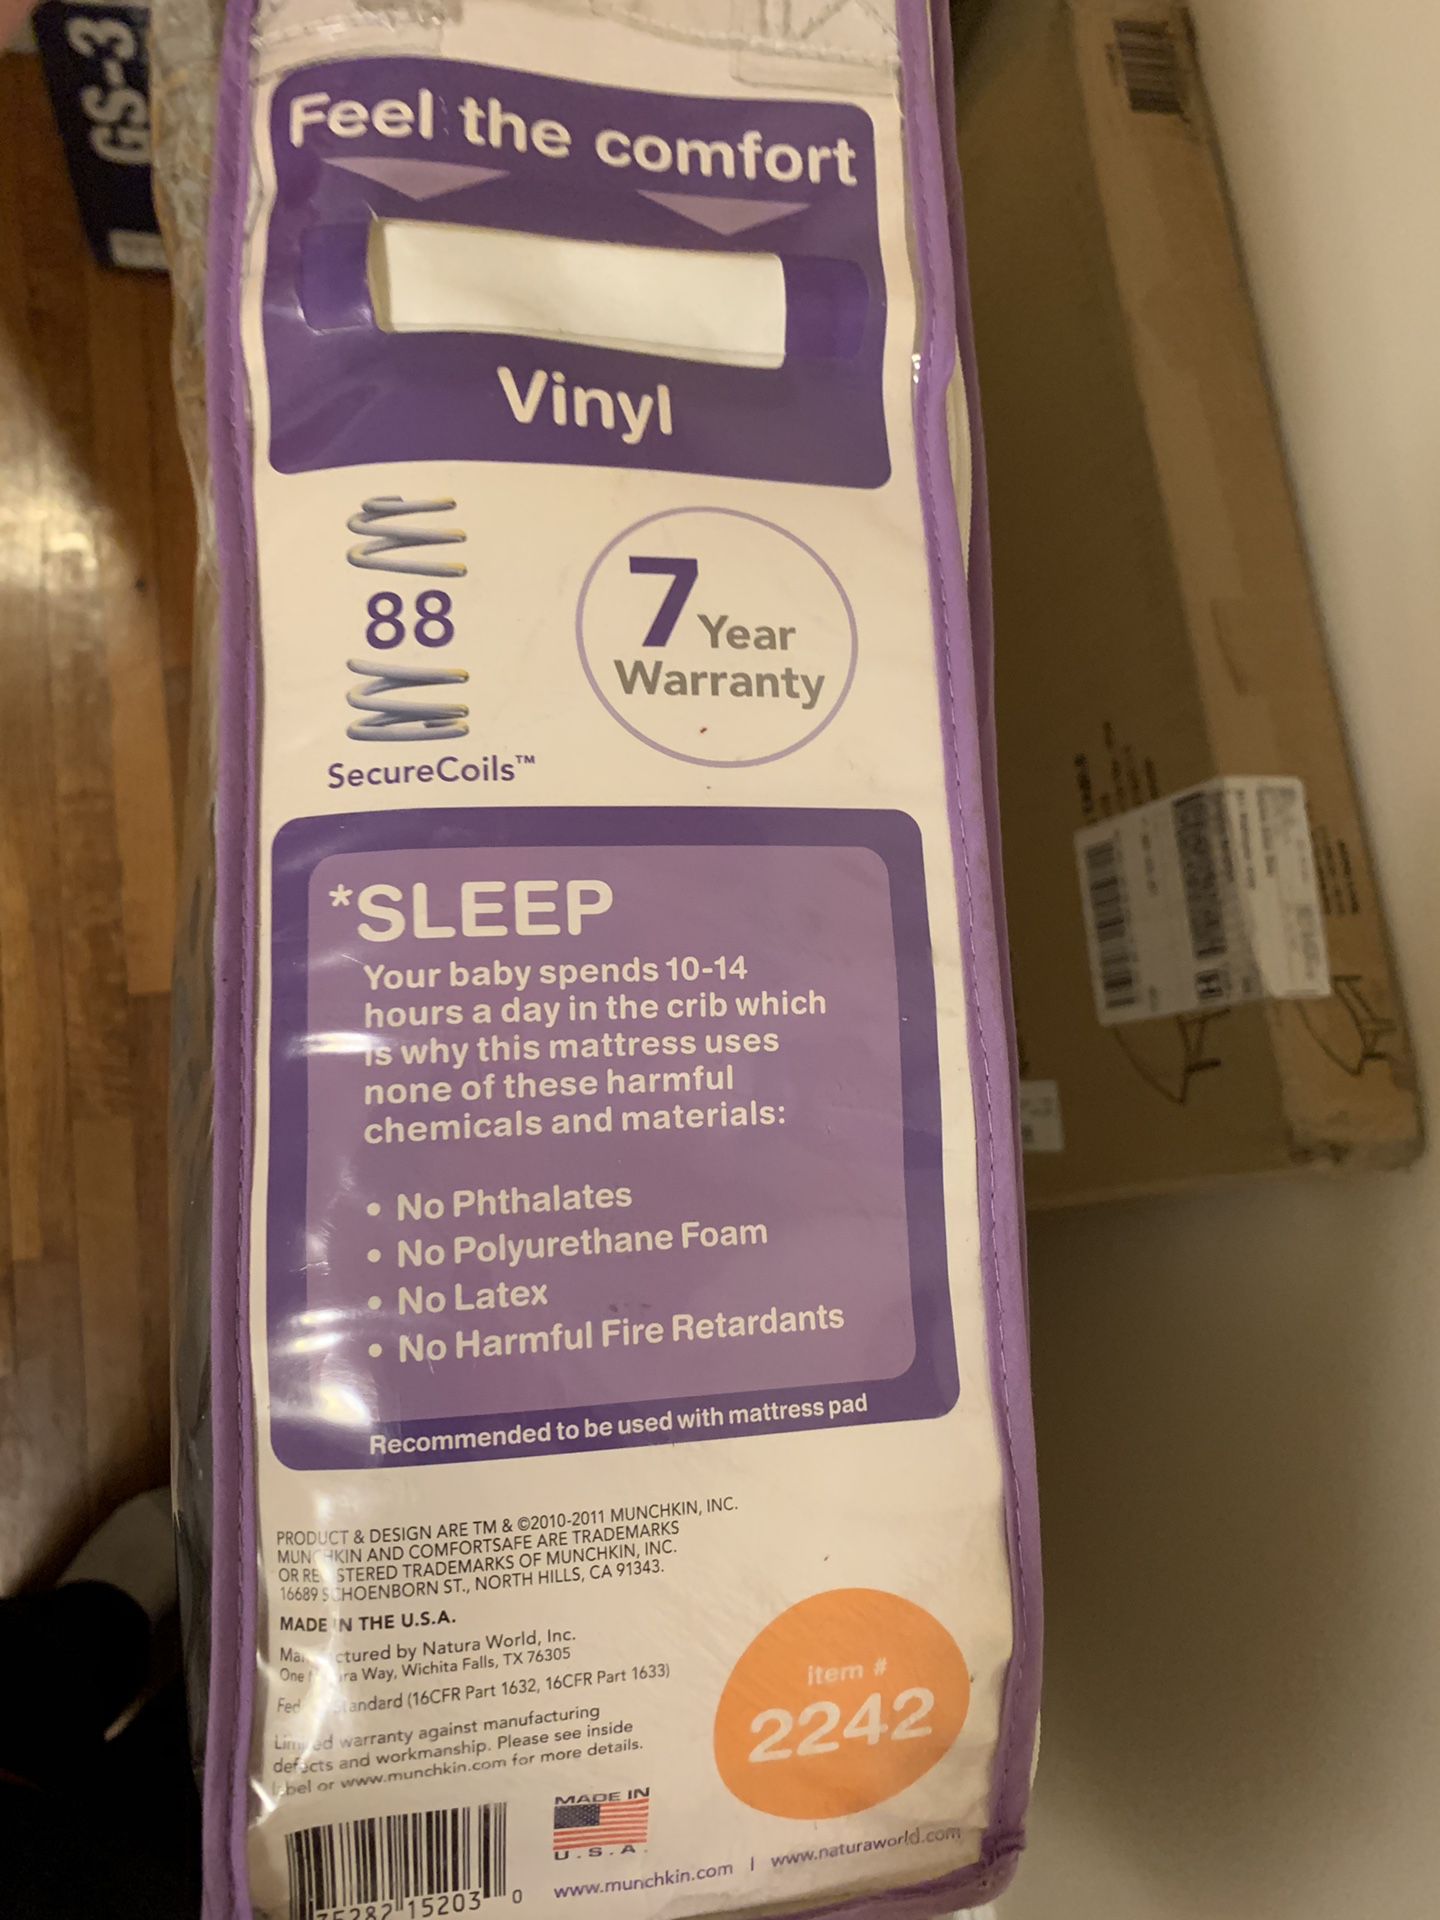 Baby crib mattress in really good condition still on his original package bag